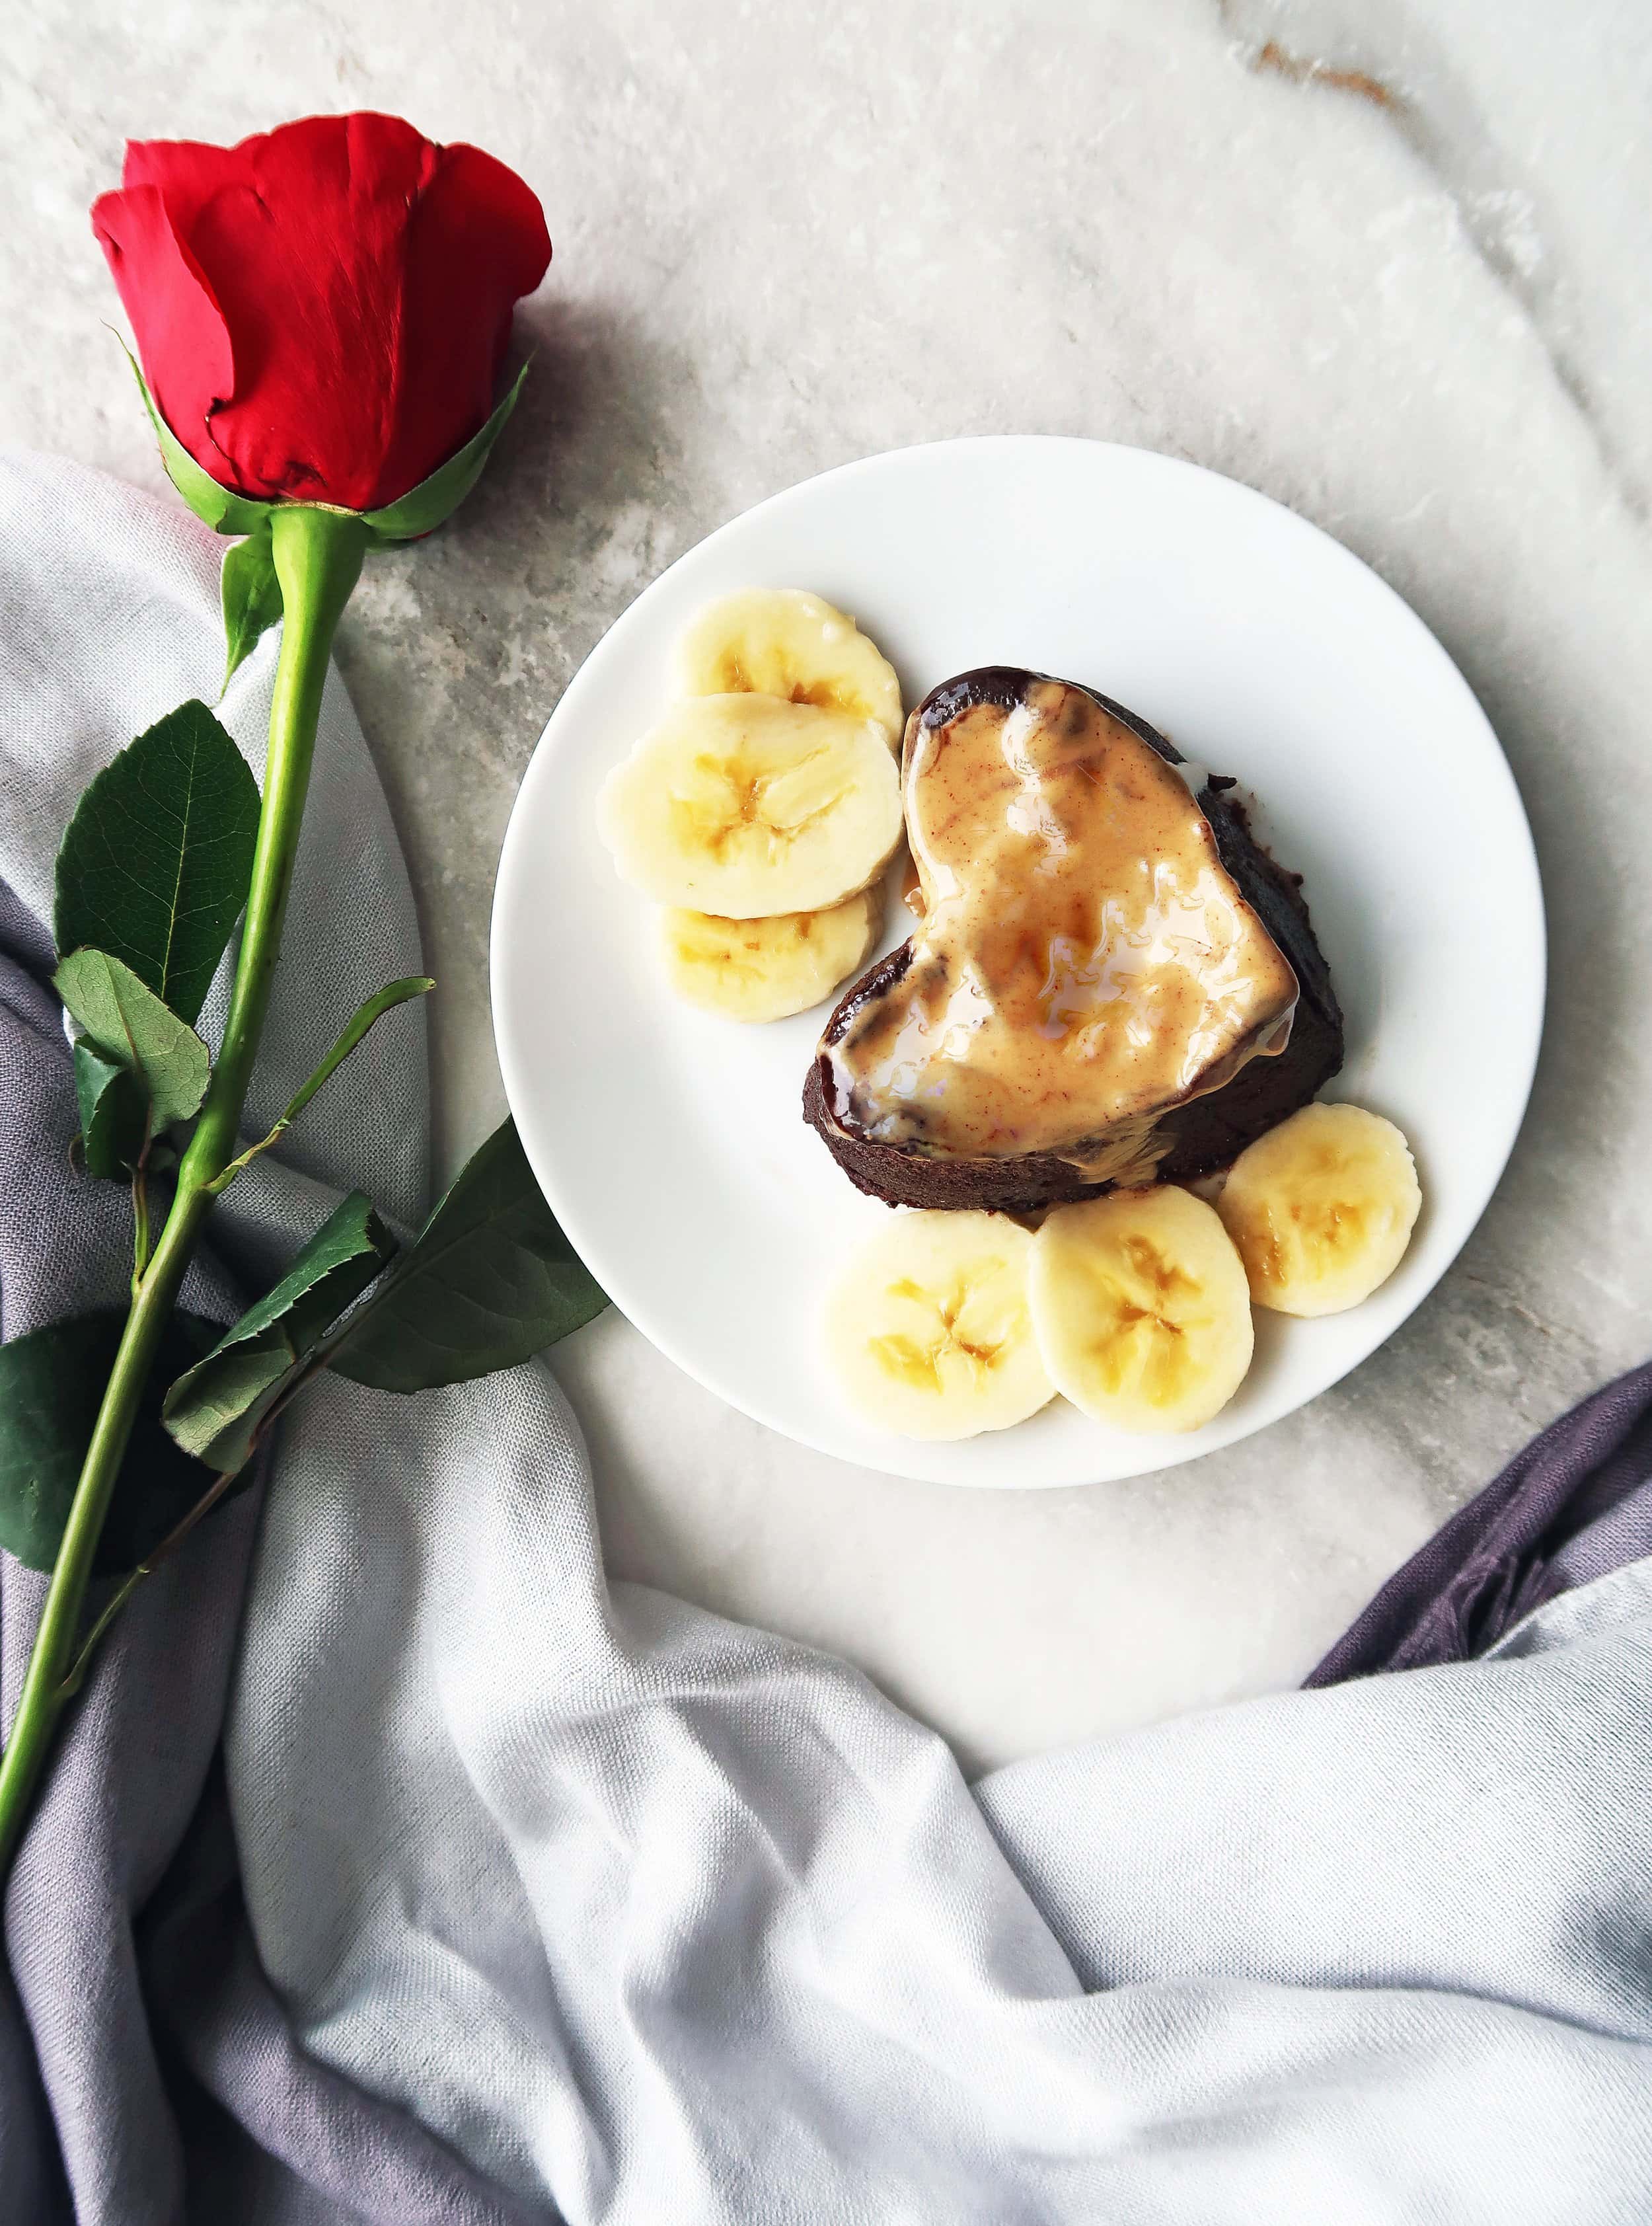 A 3 Minute Peanut Butter Banana Chocolate Mini Cake on a plate with banana slices.